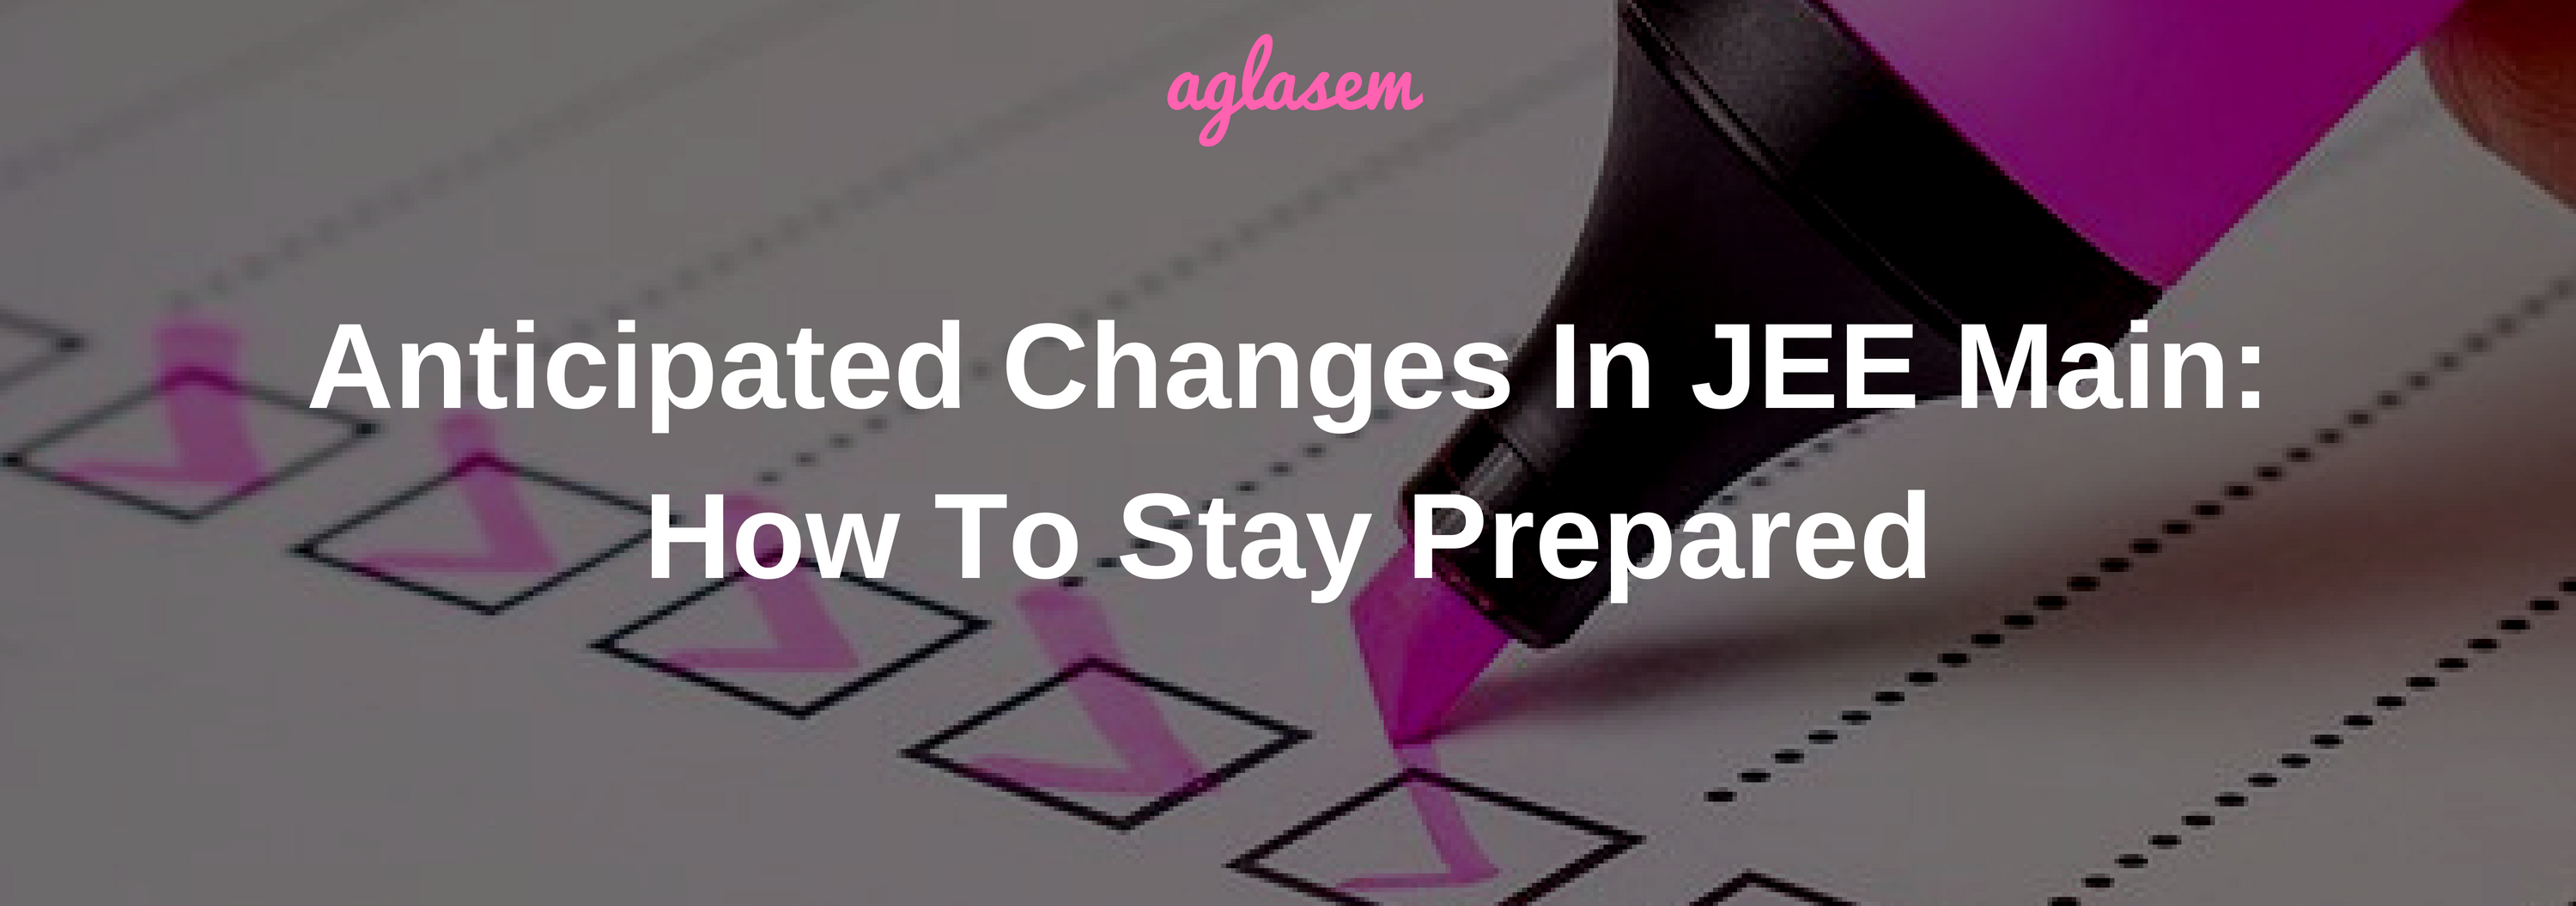 Biggest Changes Anticipated in JEE Main 2019